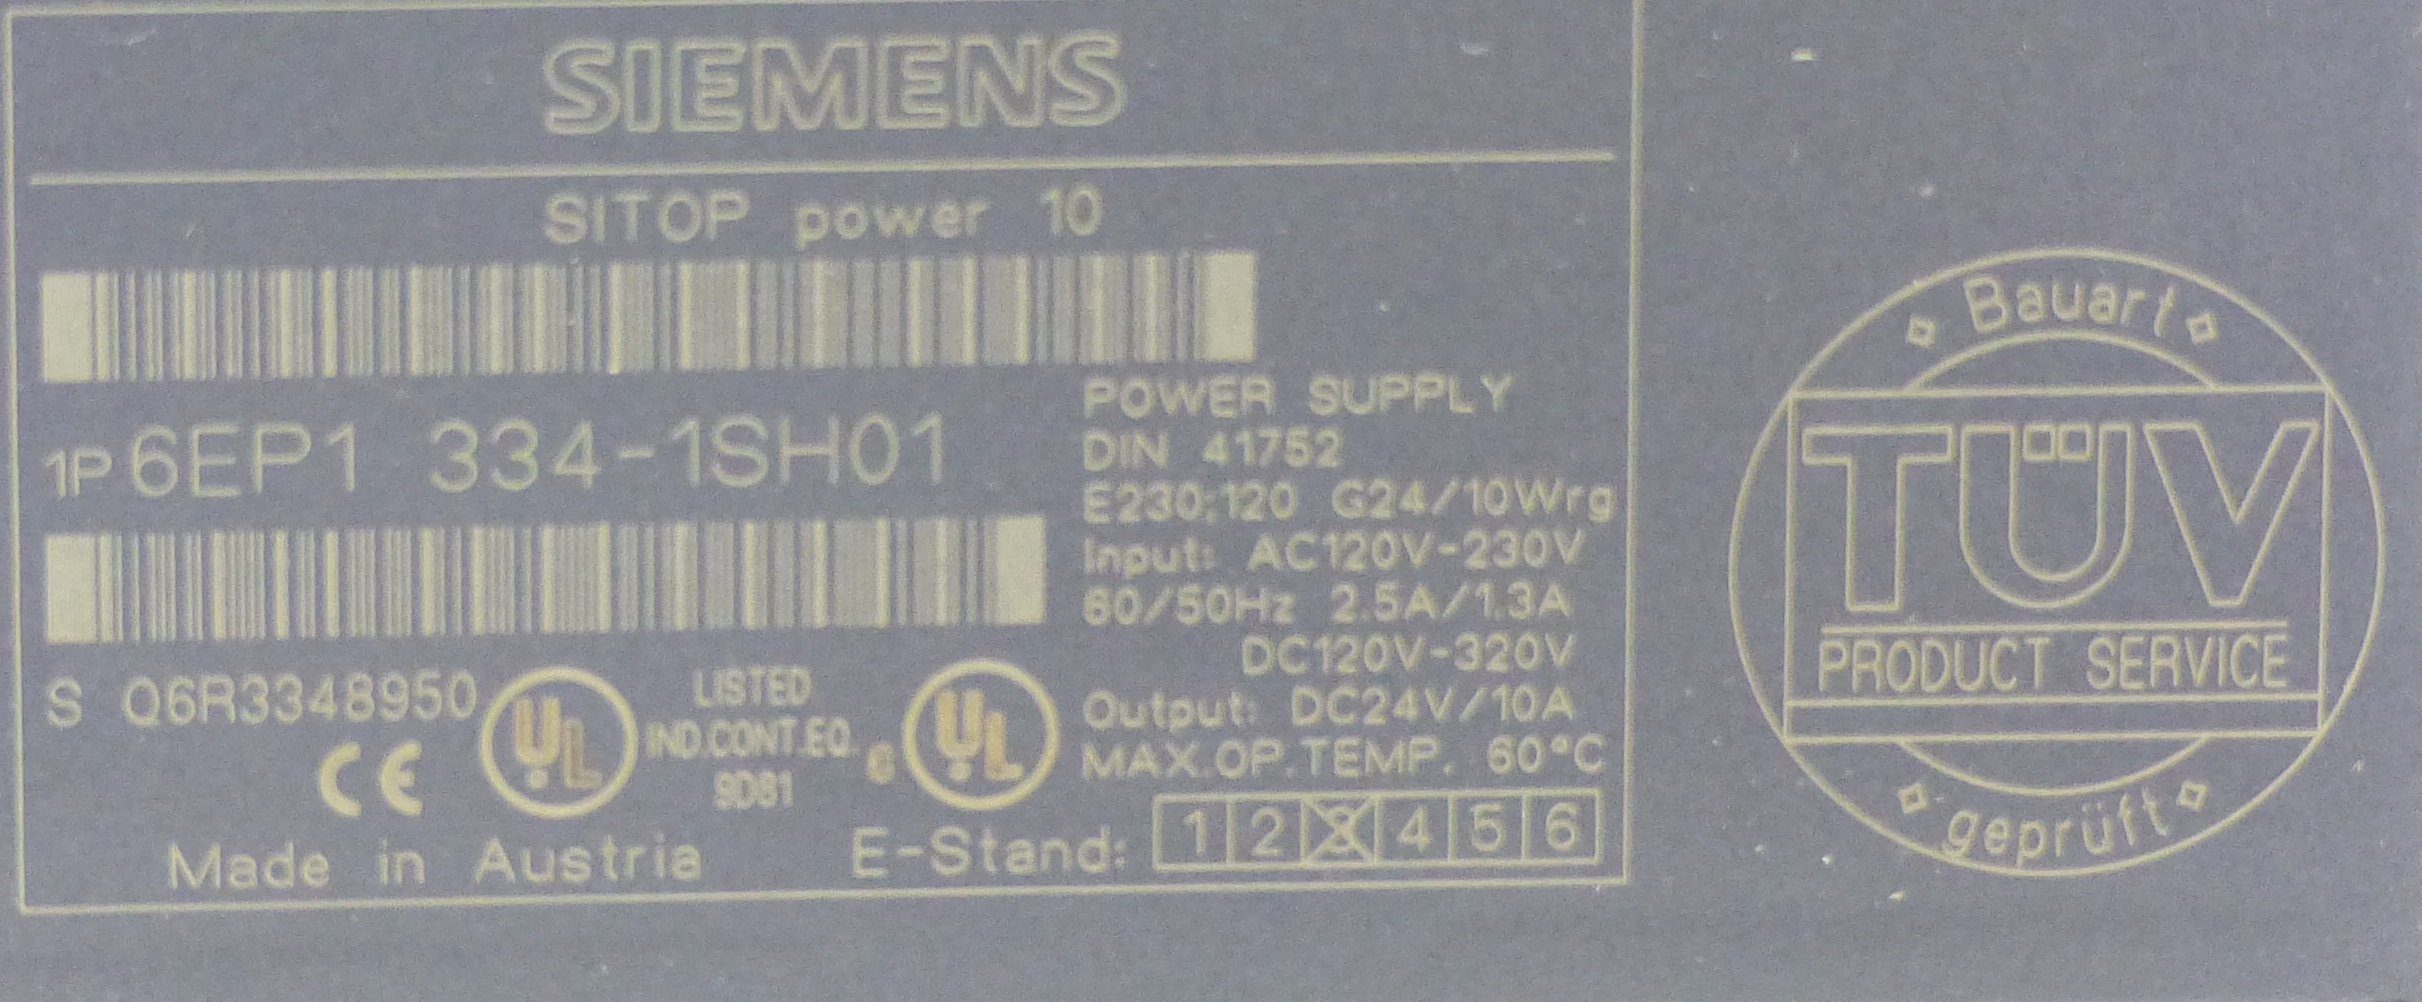 Power Supply Unit Sitop Power 10 